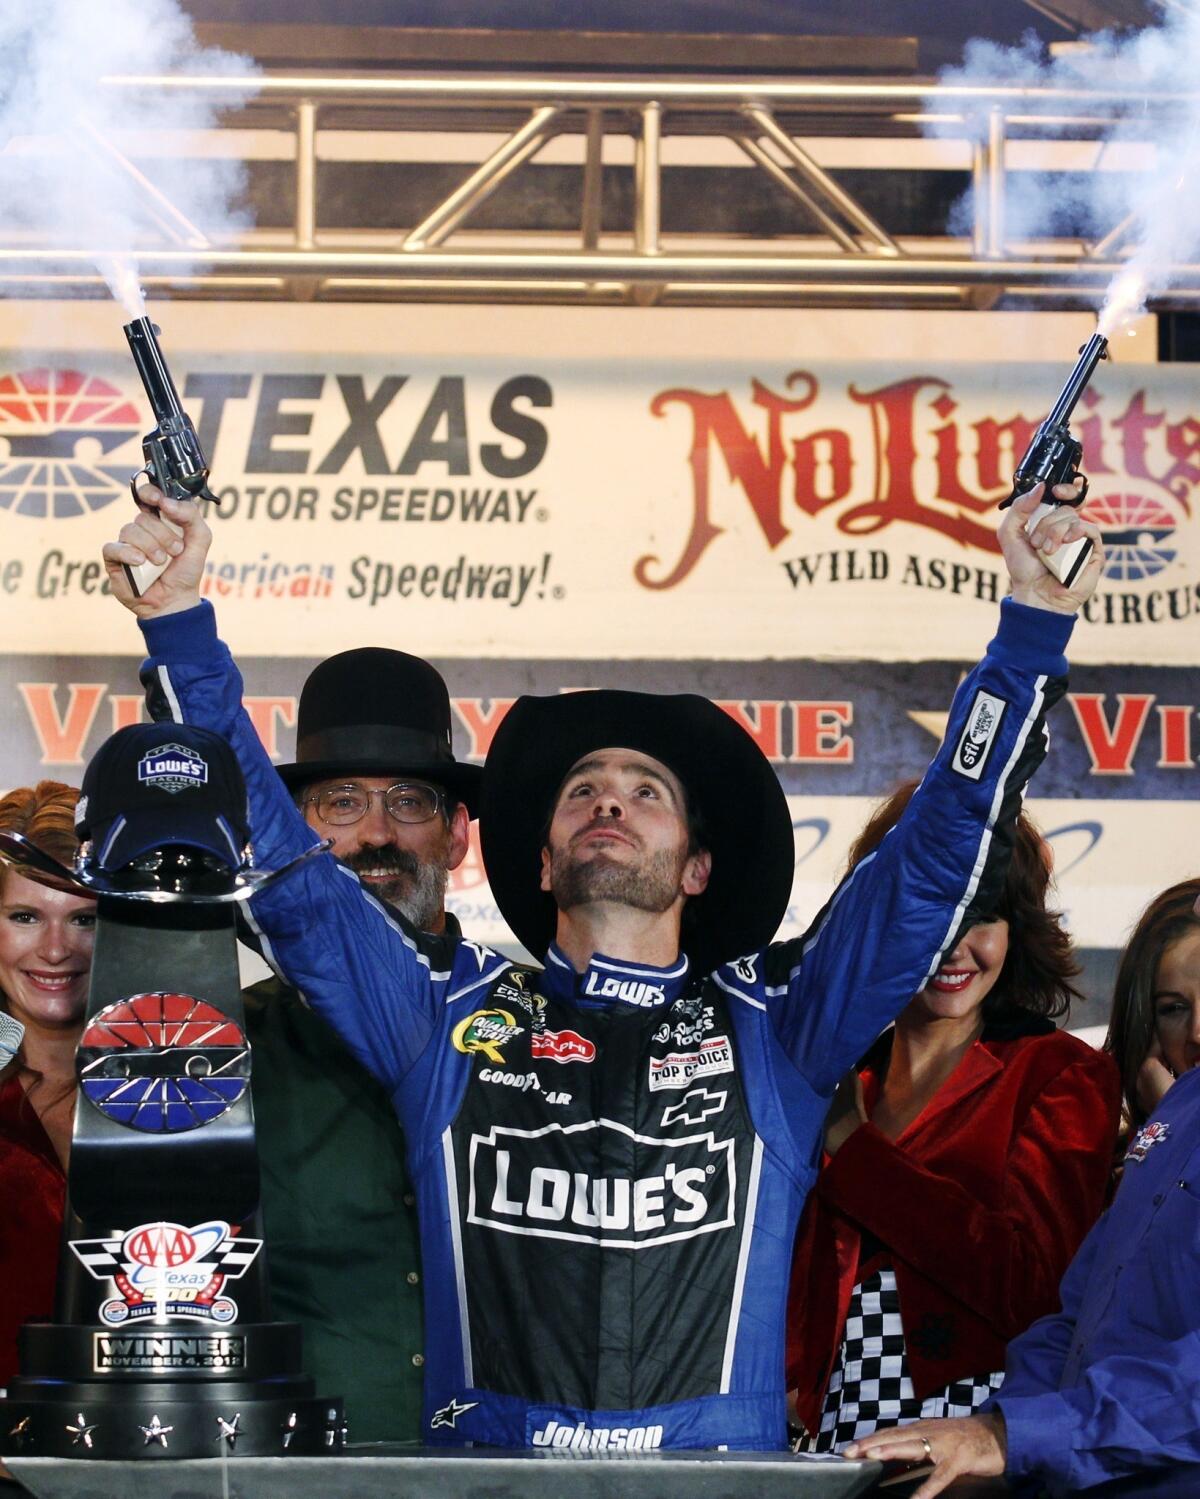 Jimmie Johnson fires blanks from a pair of revolvers as he celebrates his win in victory lane following the NASCAR Sprint Cup Series race at Texas Motor Speedway in Fort Worth in November.